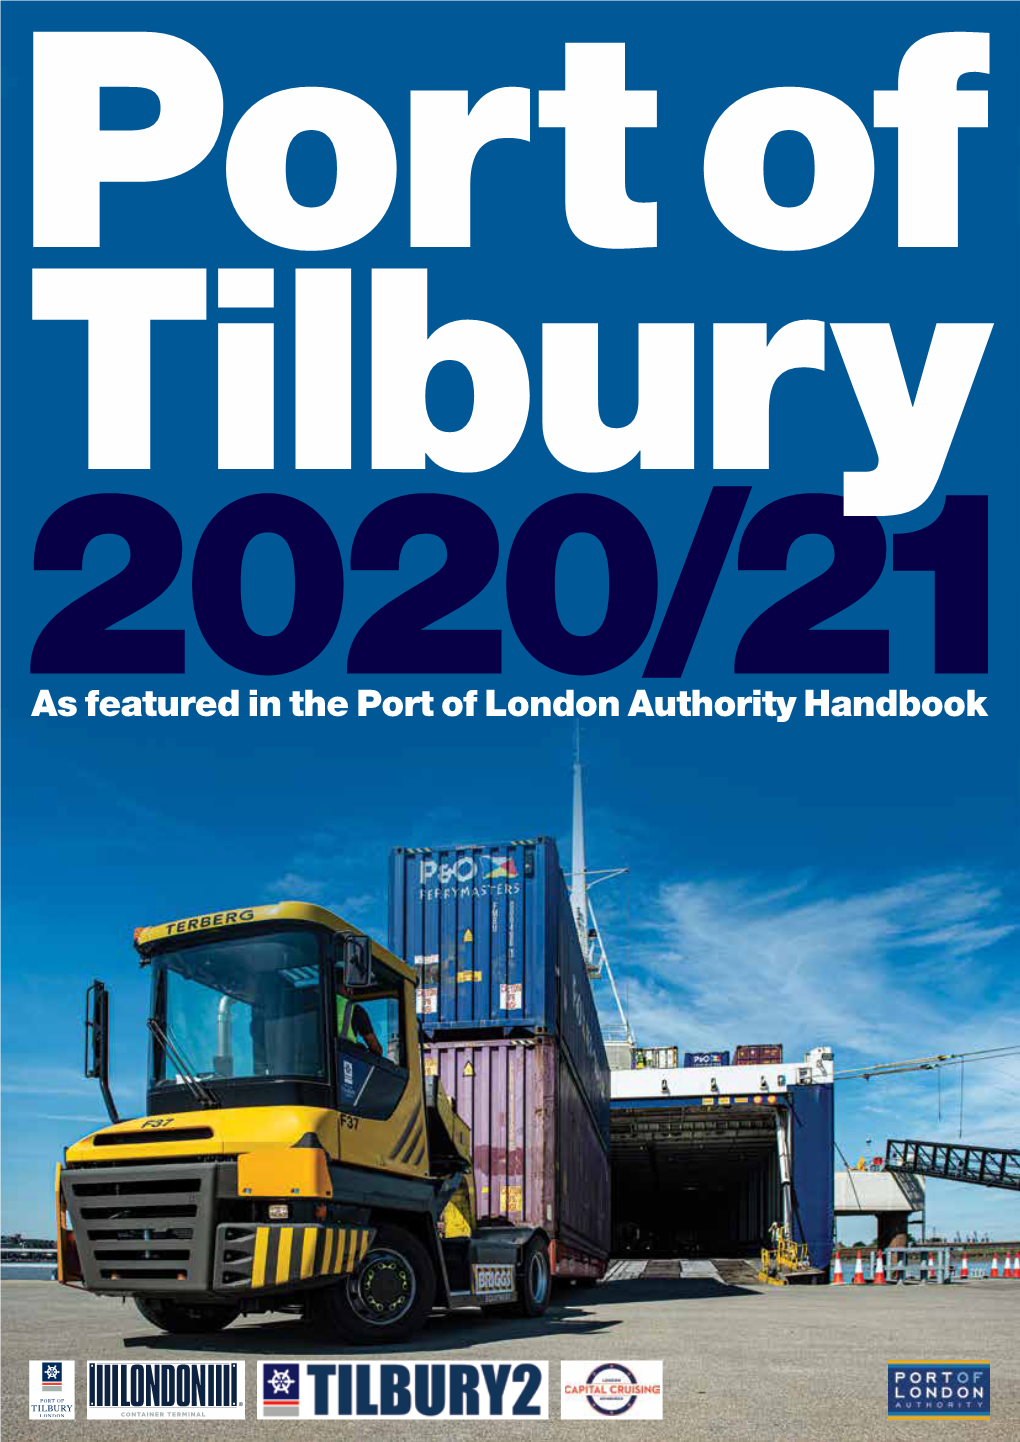 As Featured in the Port of London Authority Handbook